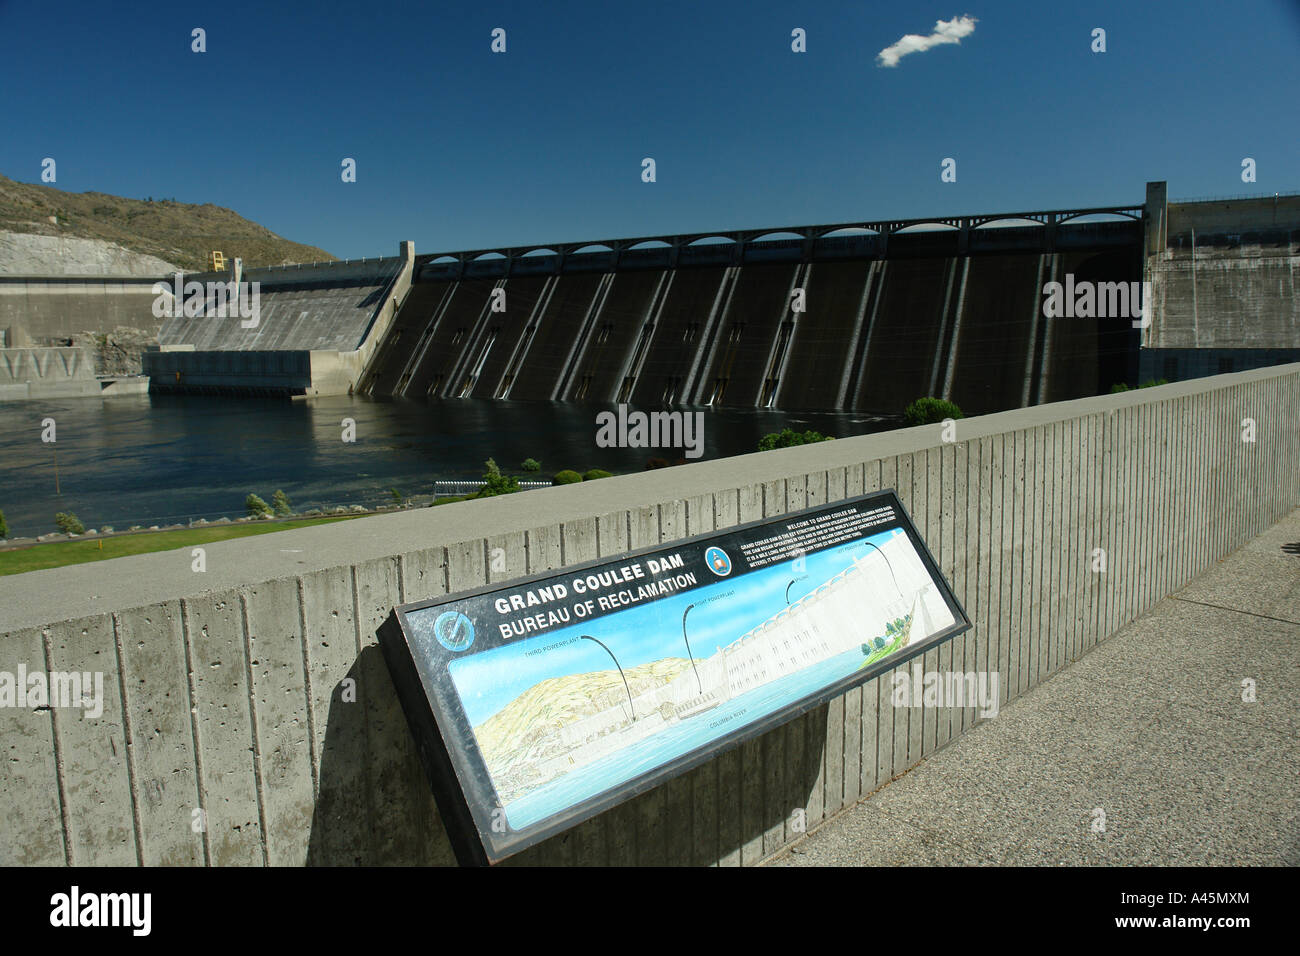 AJD55870, Coulee Dam, WA, Washington, Grand Coulee, Columbia River, Lake Franklin D. Roosevelt National Recreation Area, Banks Stock Photo